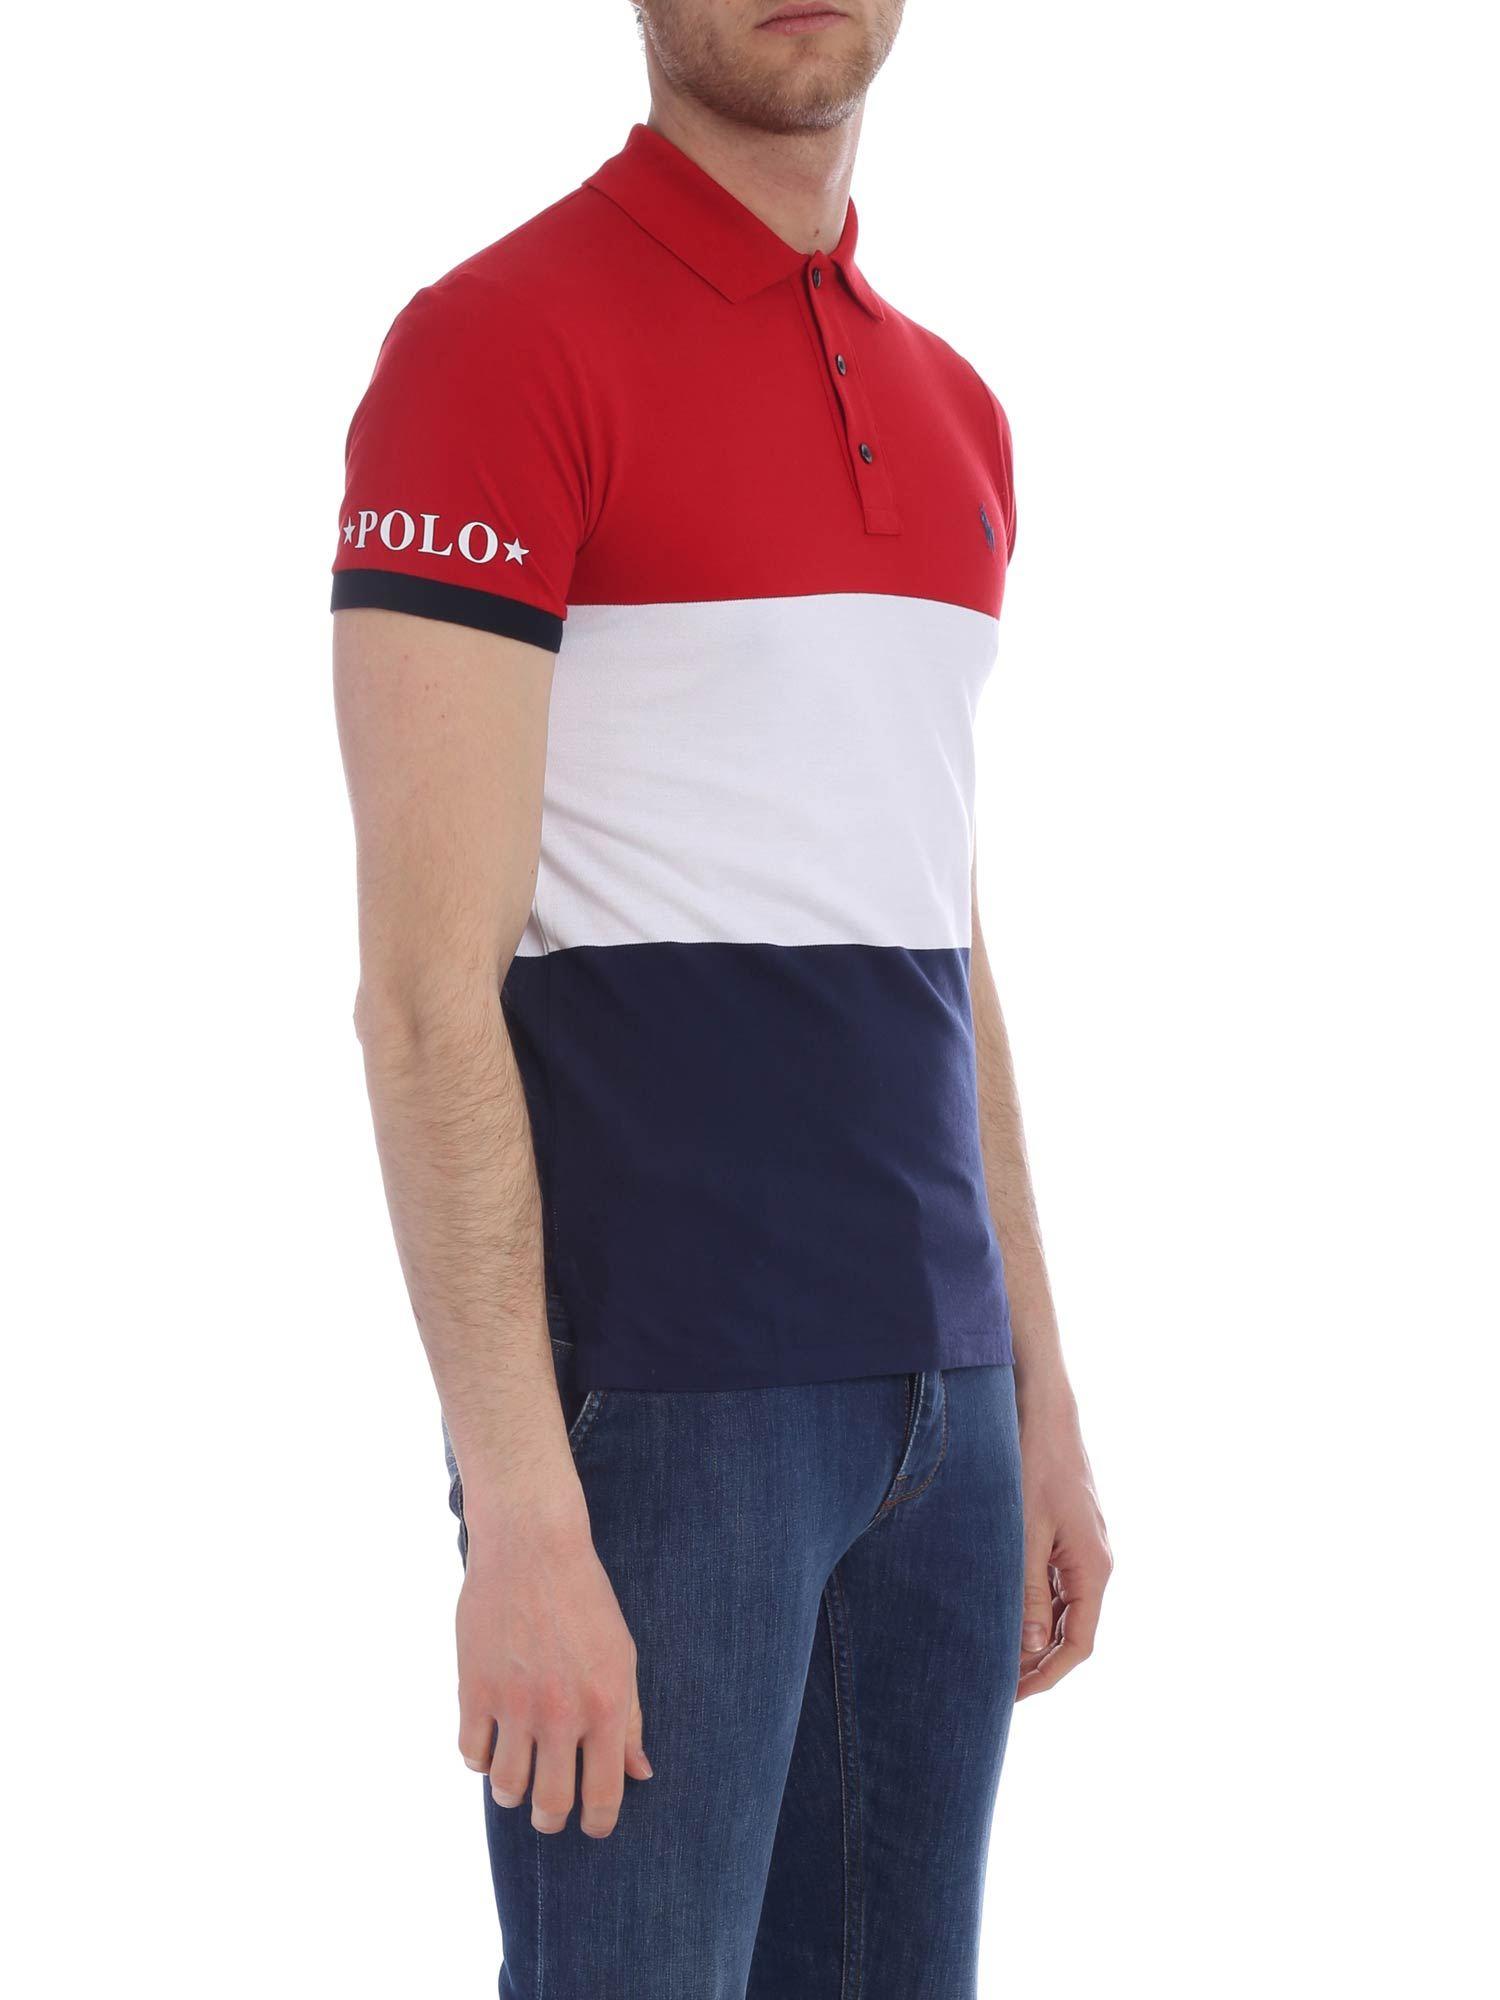 polo red and blue